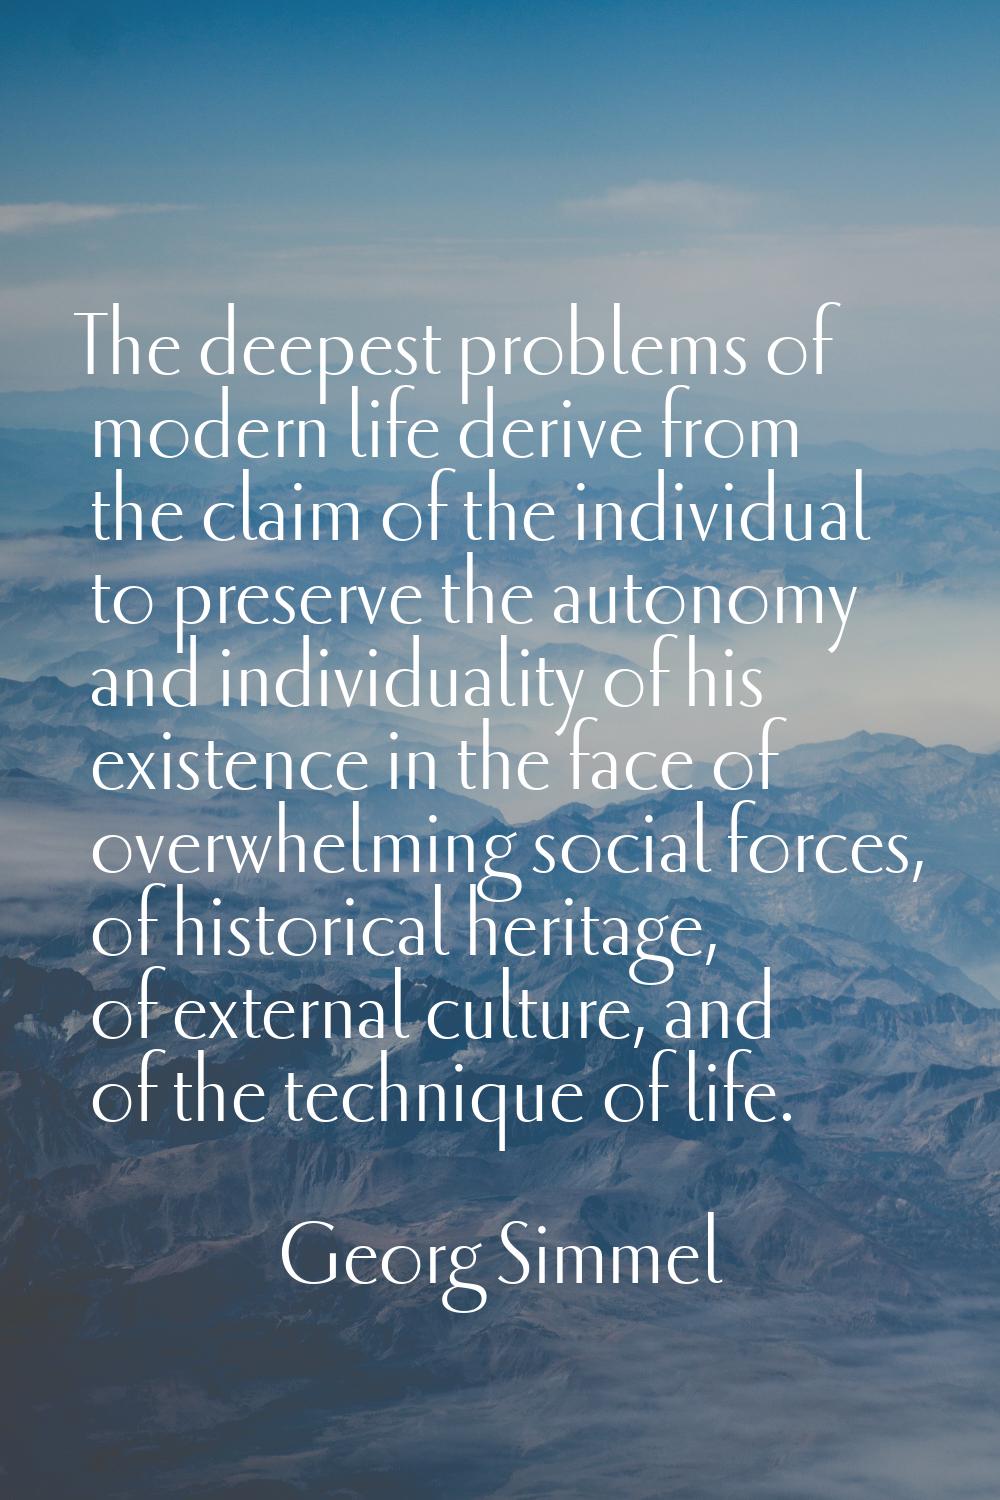 The deepest problems of modern life derive from the claim of the individual to preserve the autonom